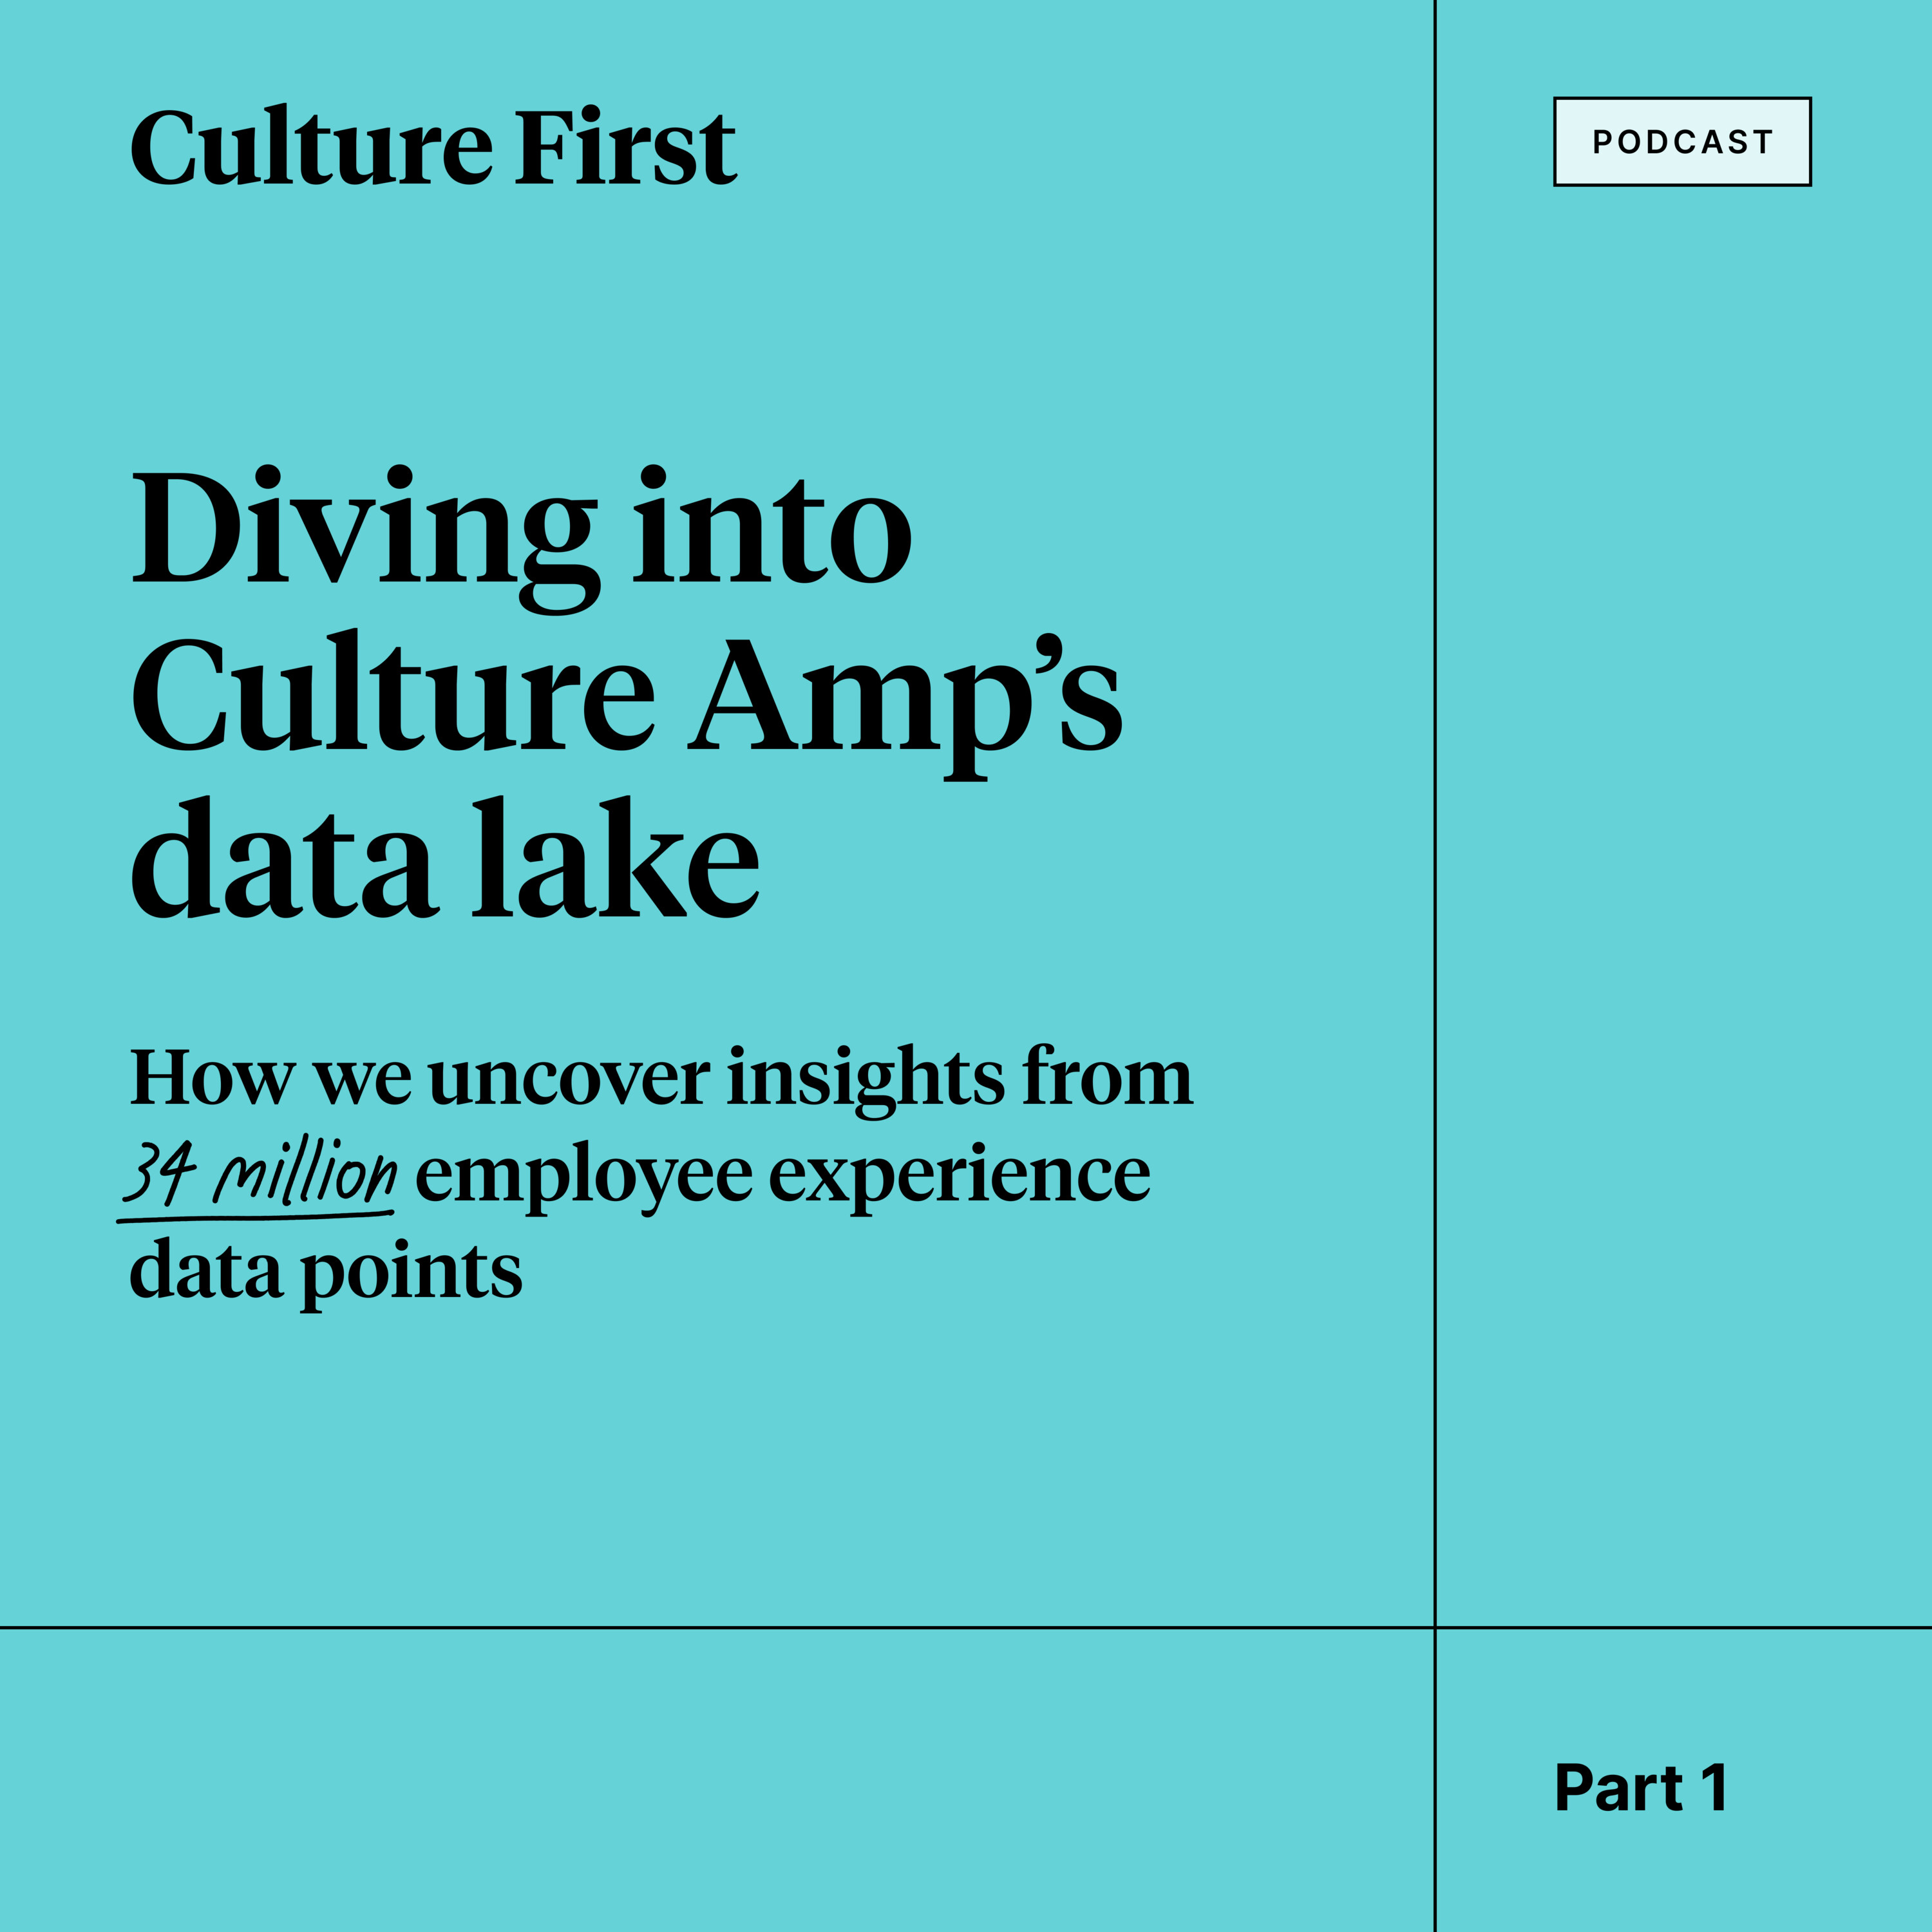 Diving into Culture Amp’s data lake - How we uncover insights from 34 million employee experience data points.